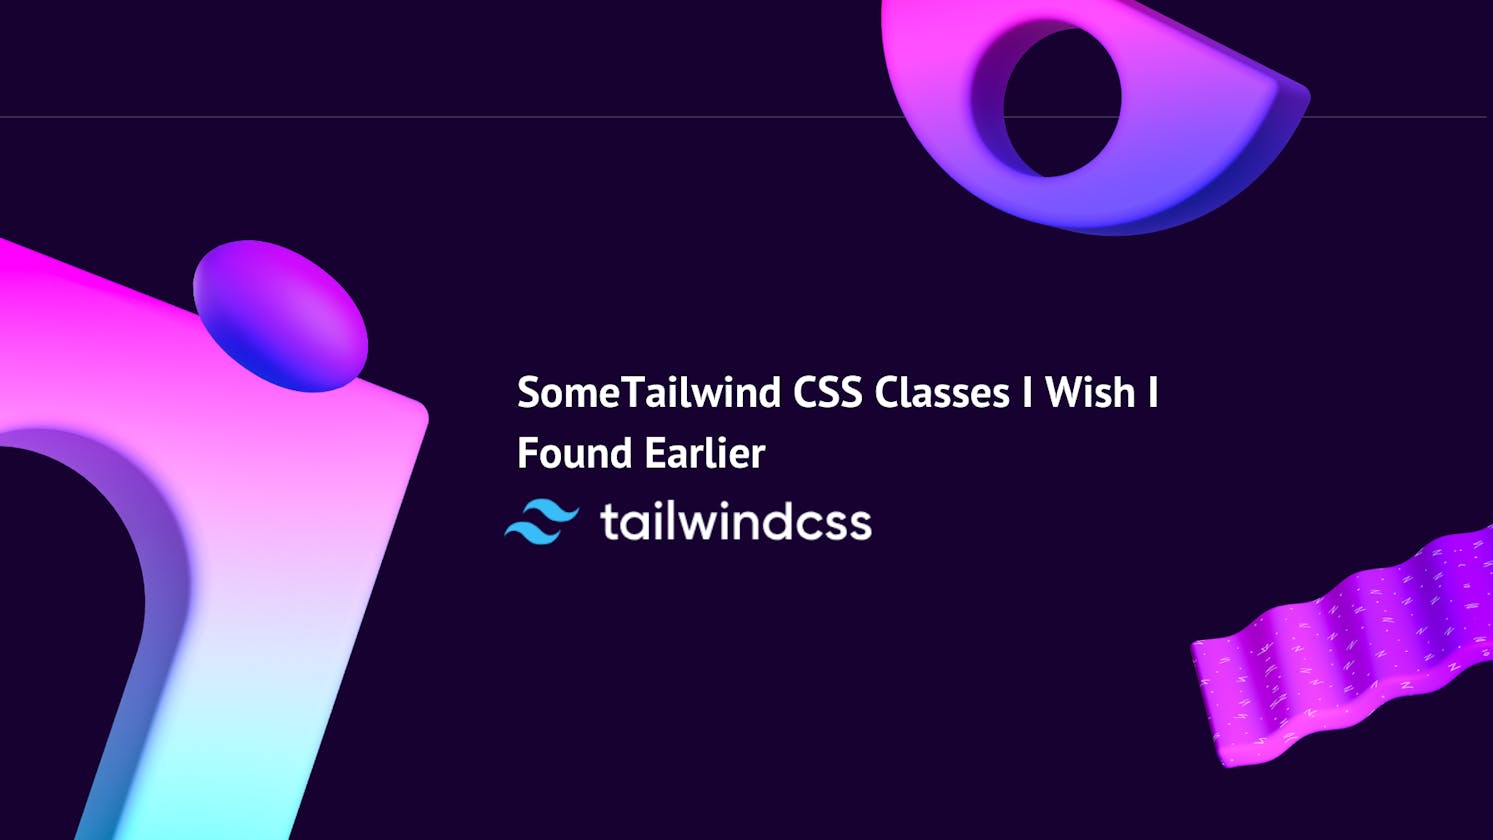 8 Tailwind CSS Classes I Wish I Found Earlier✈️